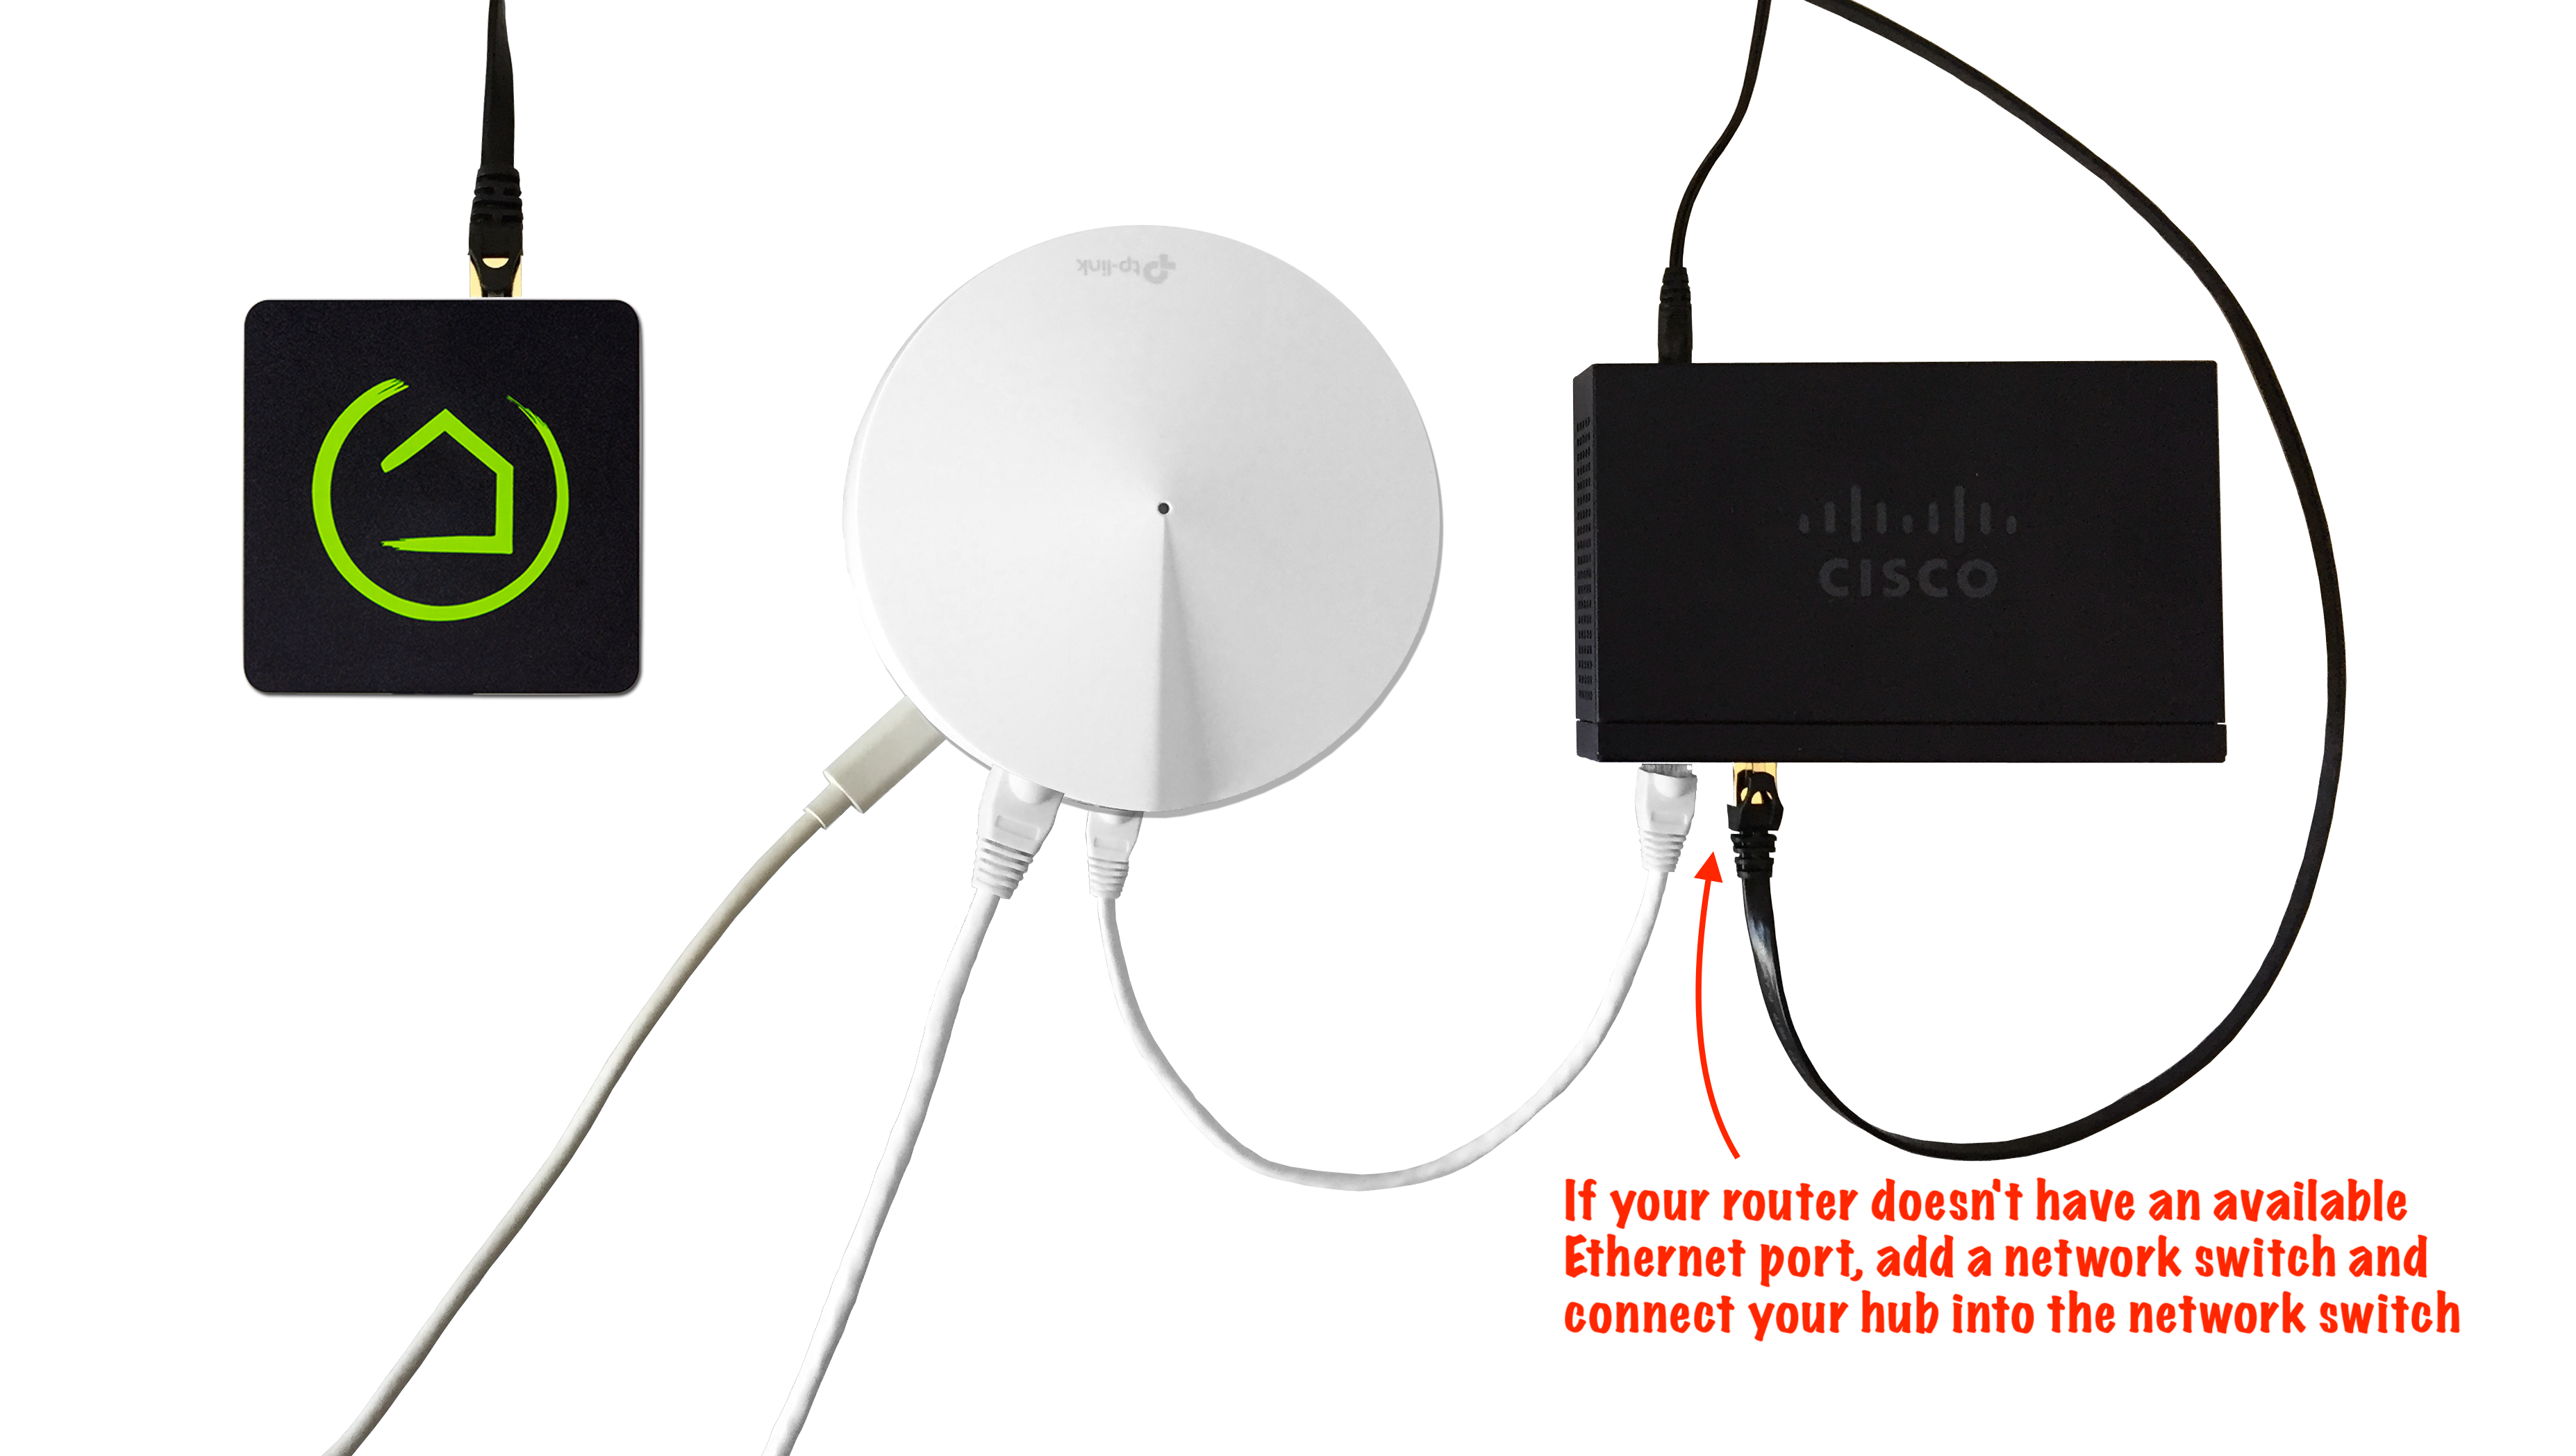 If your router doesn't have an available Ethernet port, add a network switch and connect your hub to the network switch